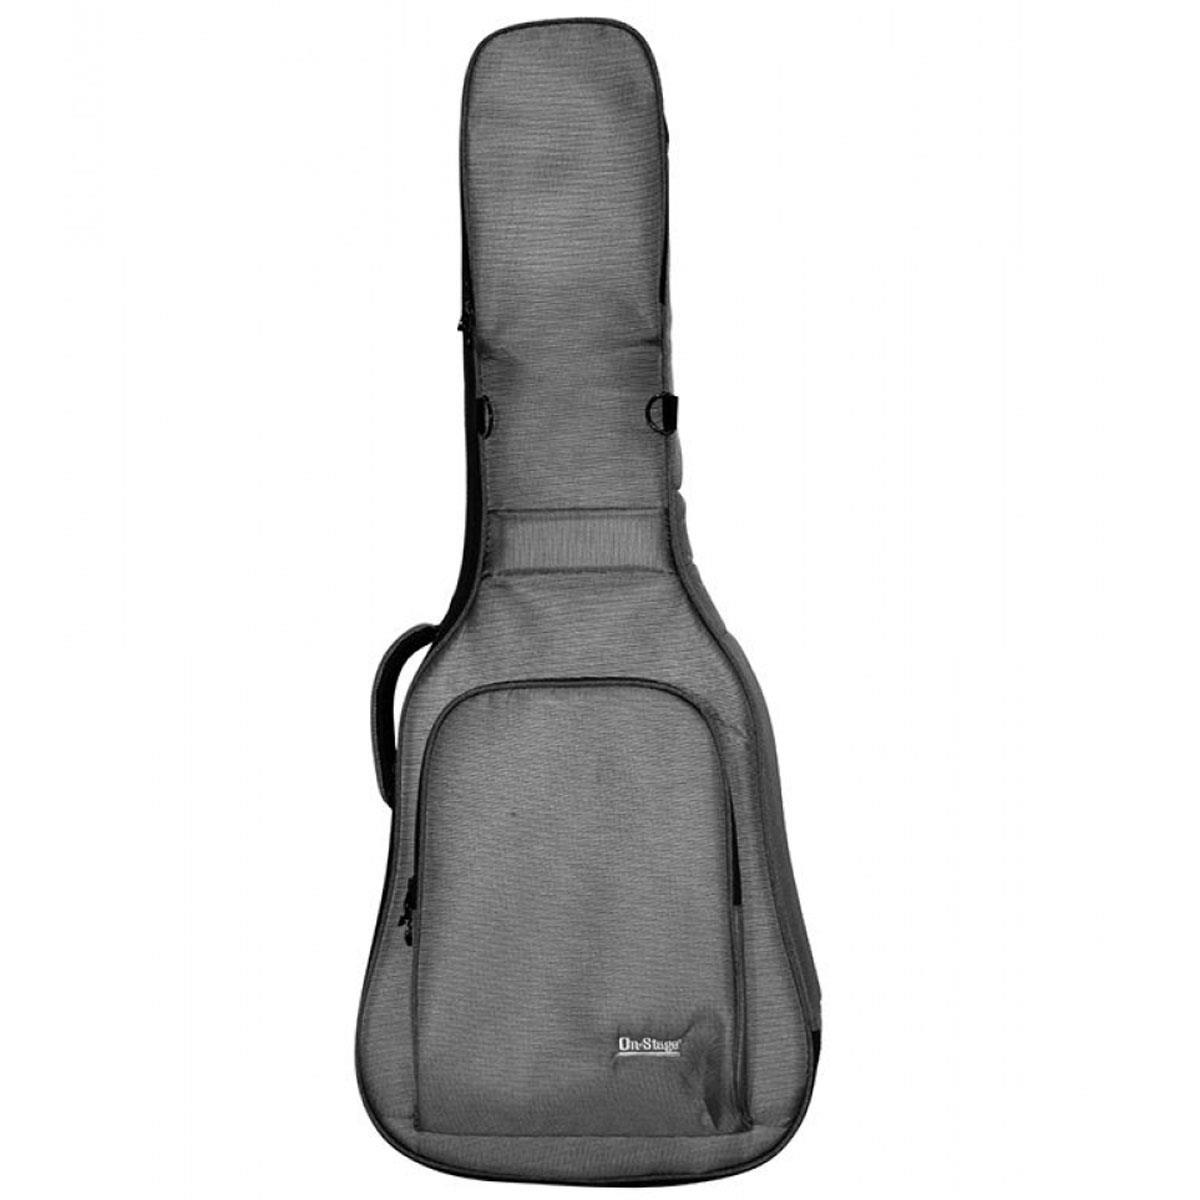 On-Stage GBC4990 Deluxe Classical Guitar Gig Bag, Charcoal Gray -  14580